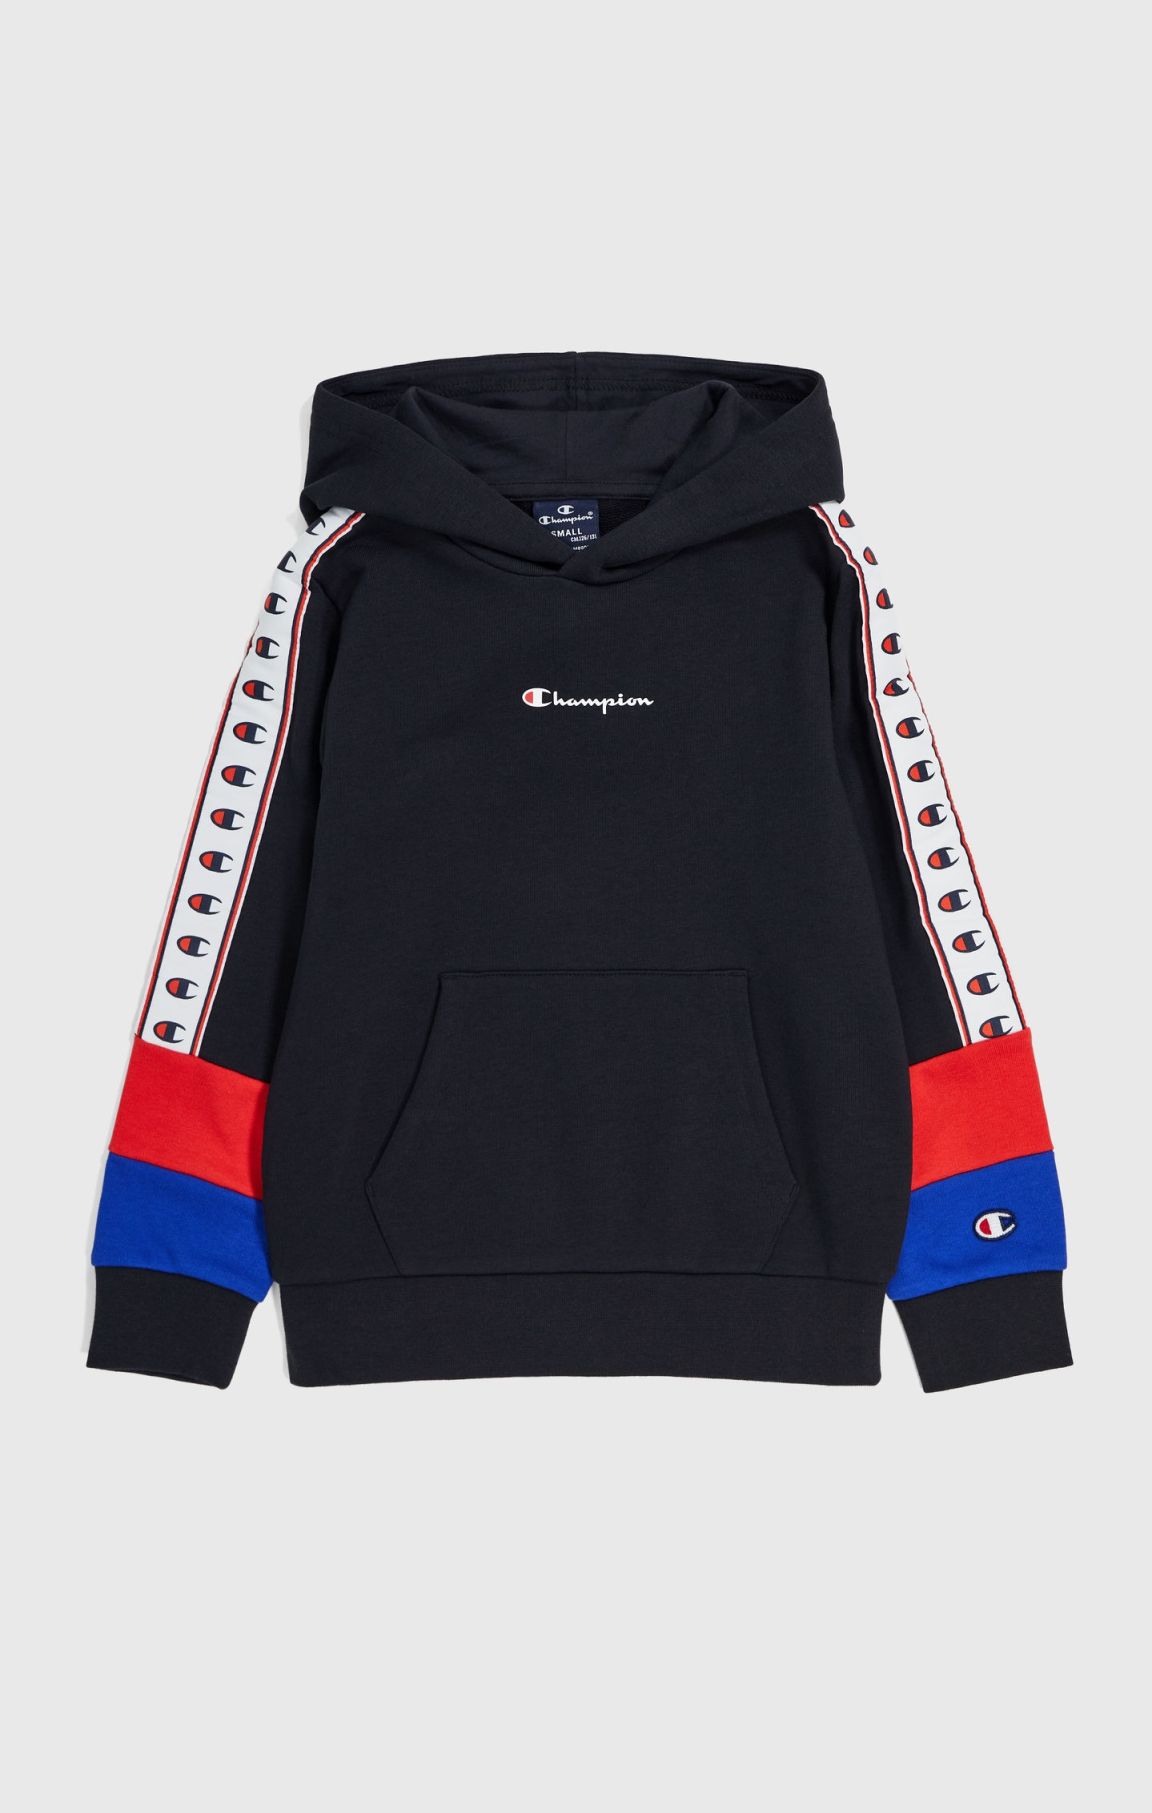 Boys Sporty Light French Terry Hoodie